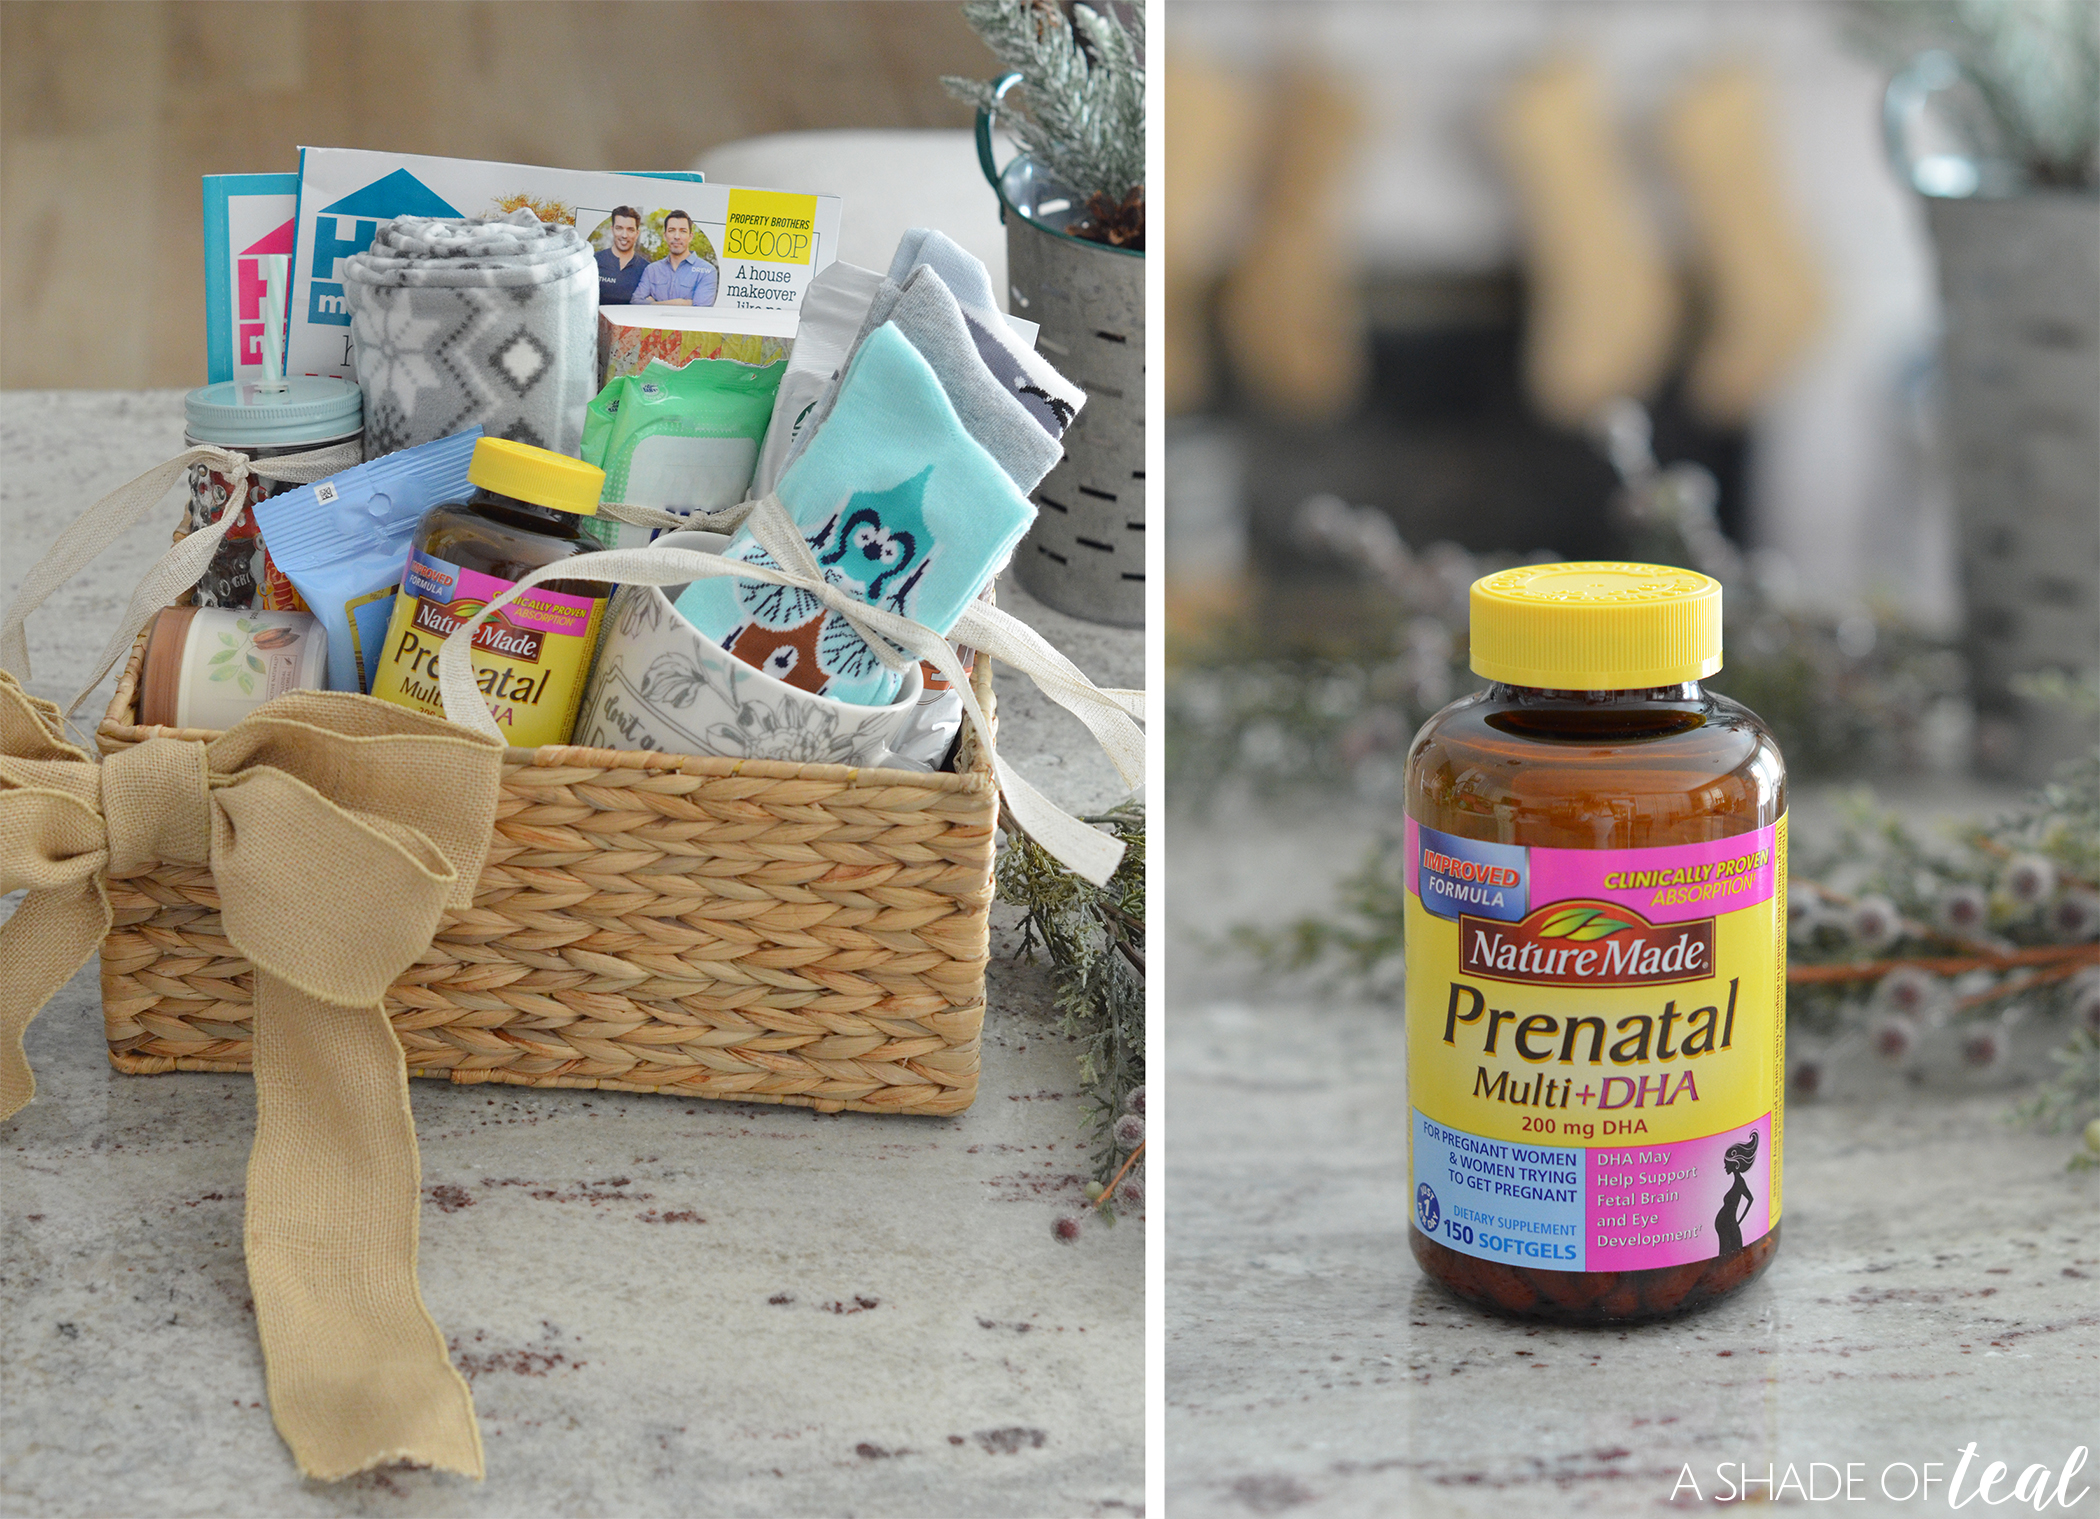 A Gift Basket for an Expecting Mom!